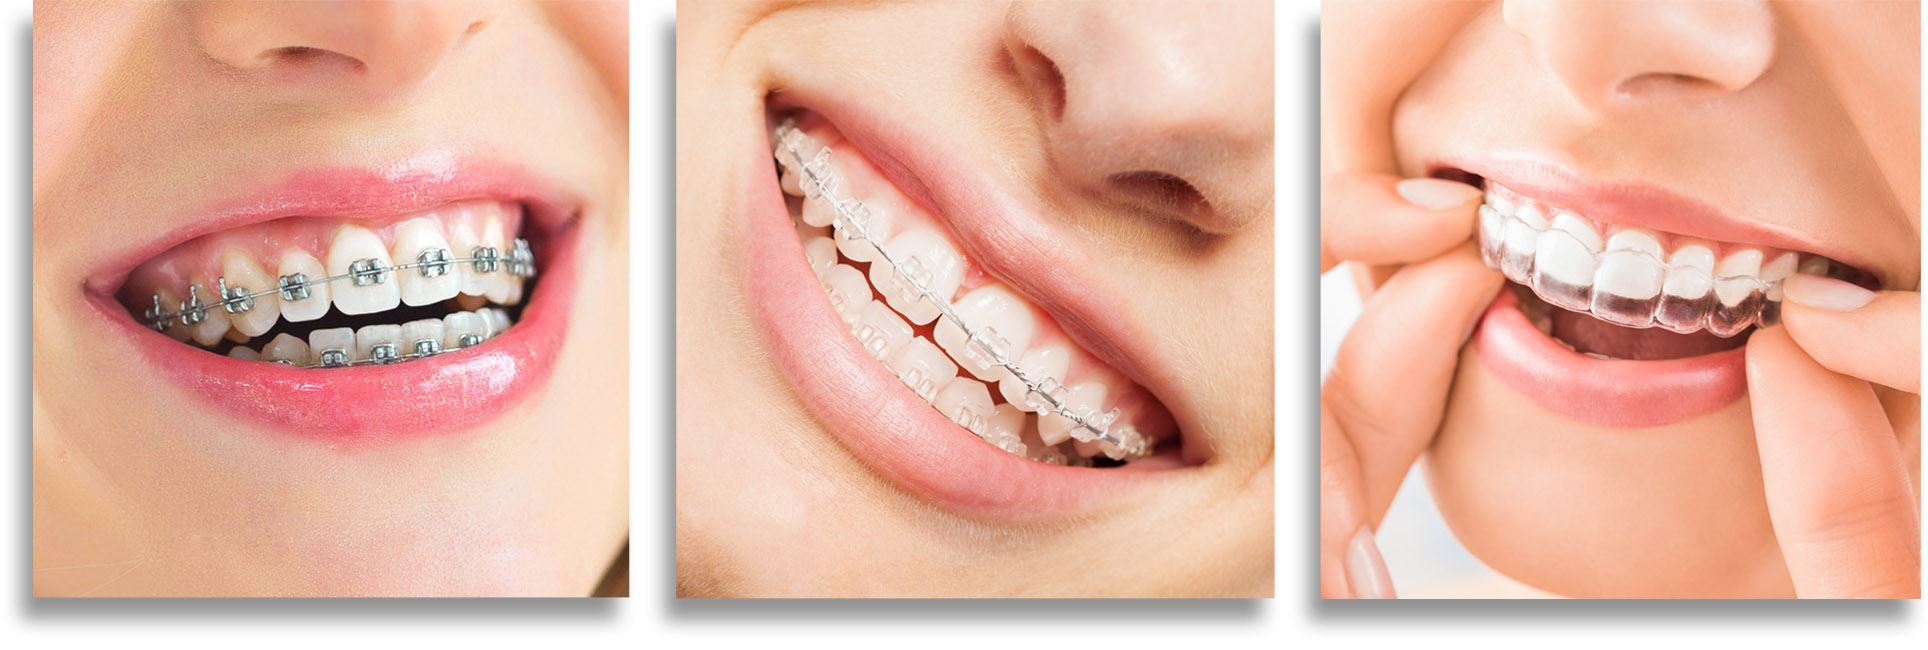 The Pros and Cons of Ceramic Braces - Belmont Smiles - Orthodontist  Belmont, MA